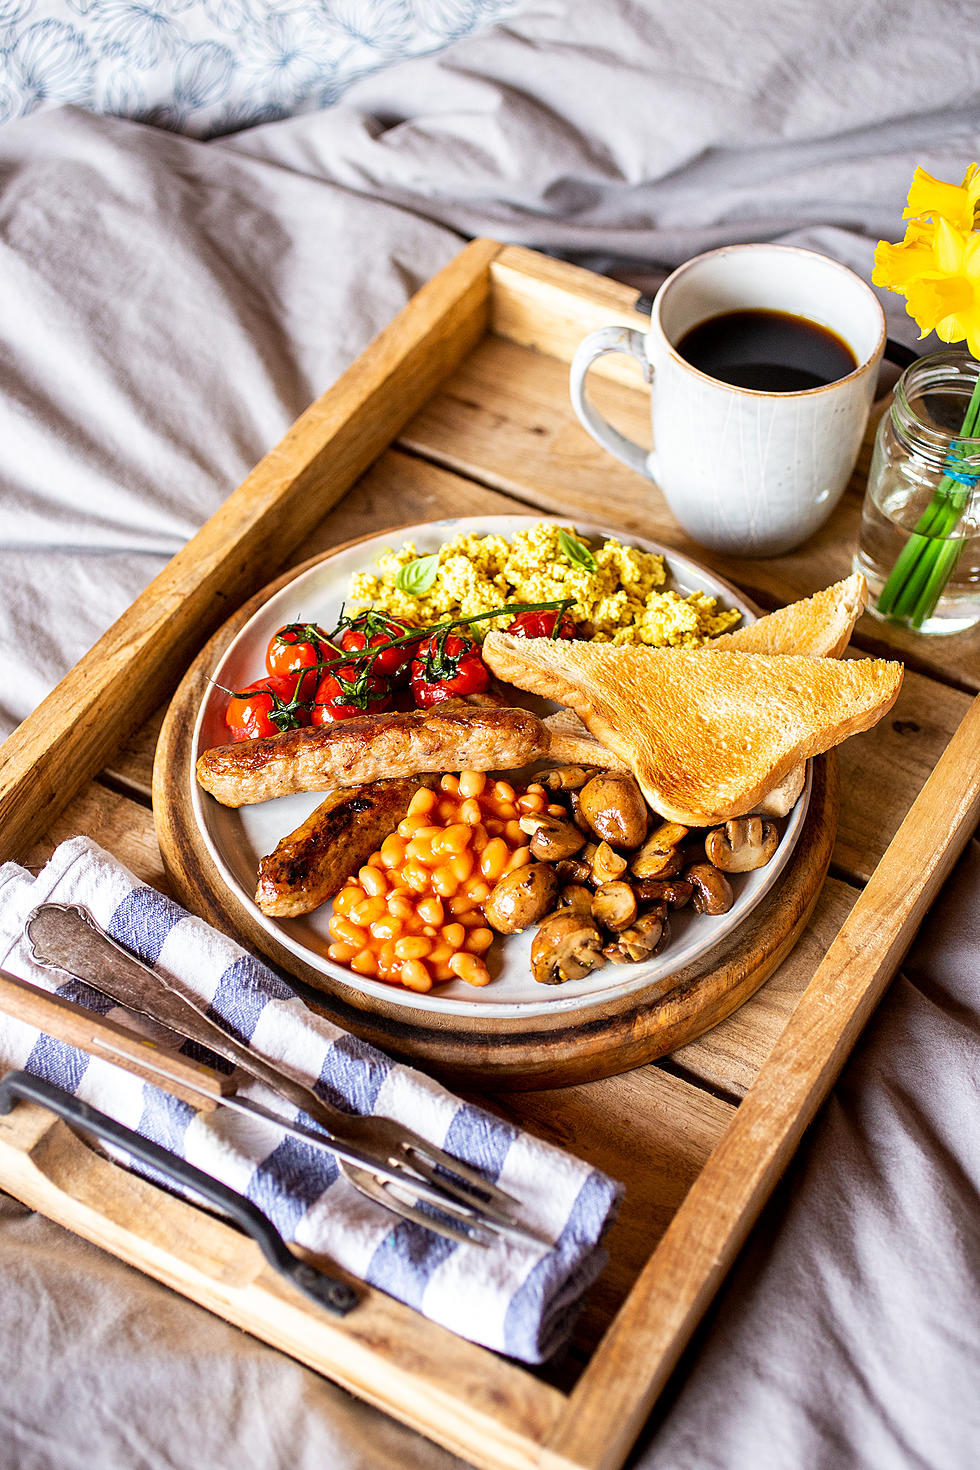 Full English Breakfast Made Vegan, The Perfect Father’s Day Breakfast